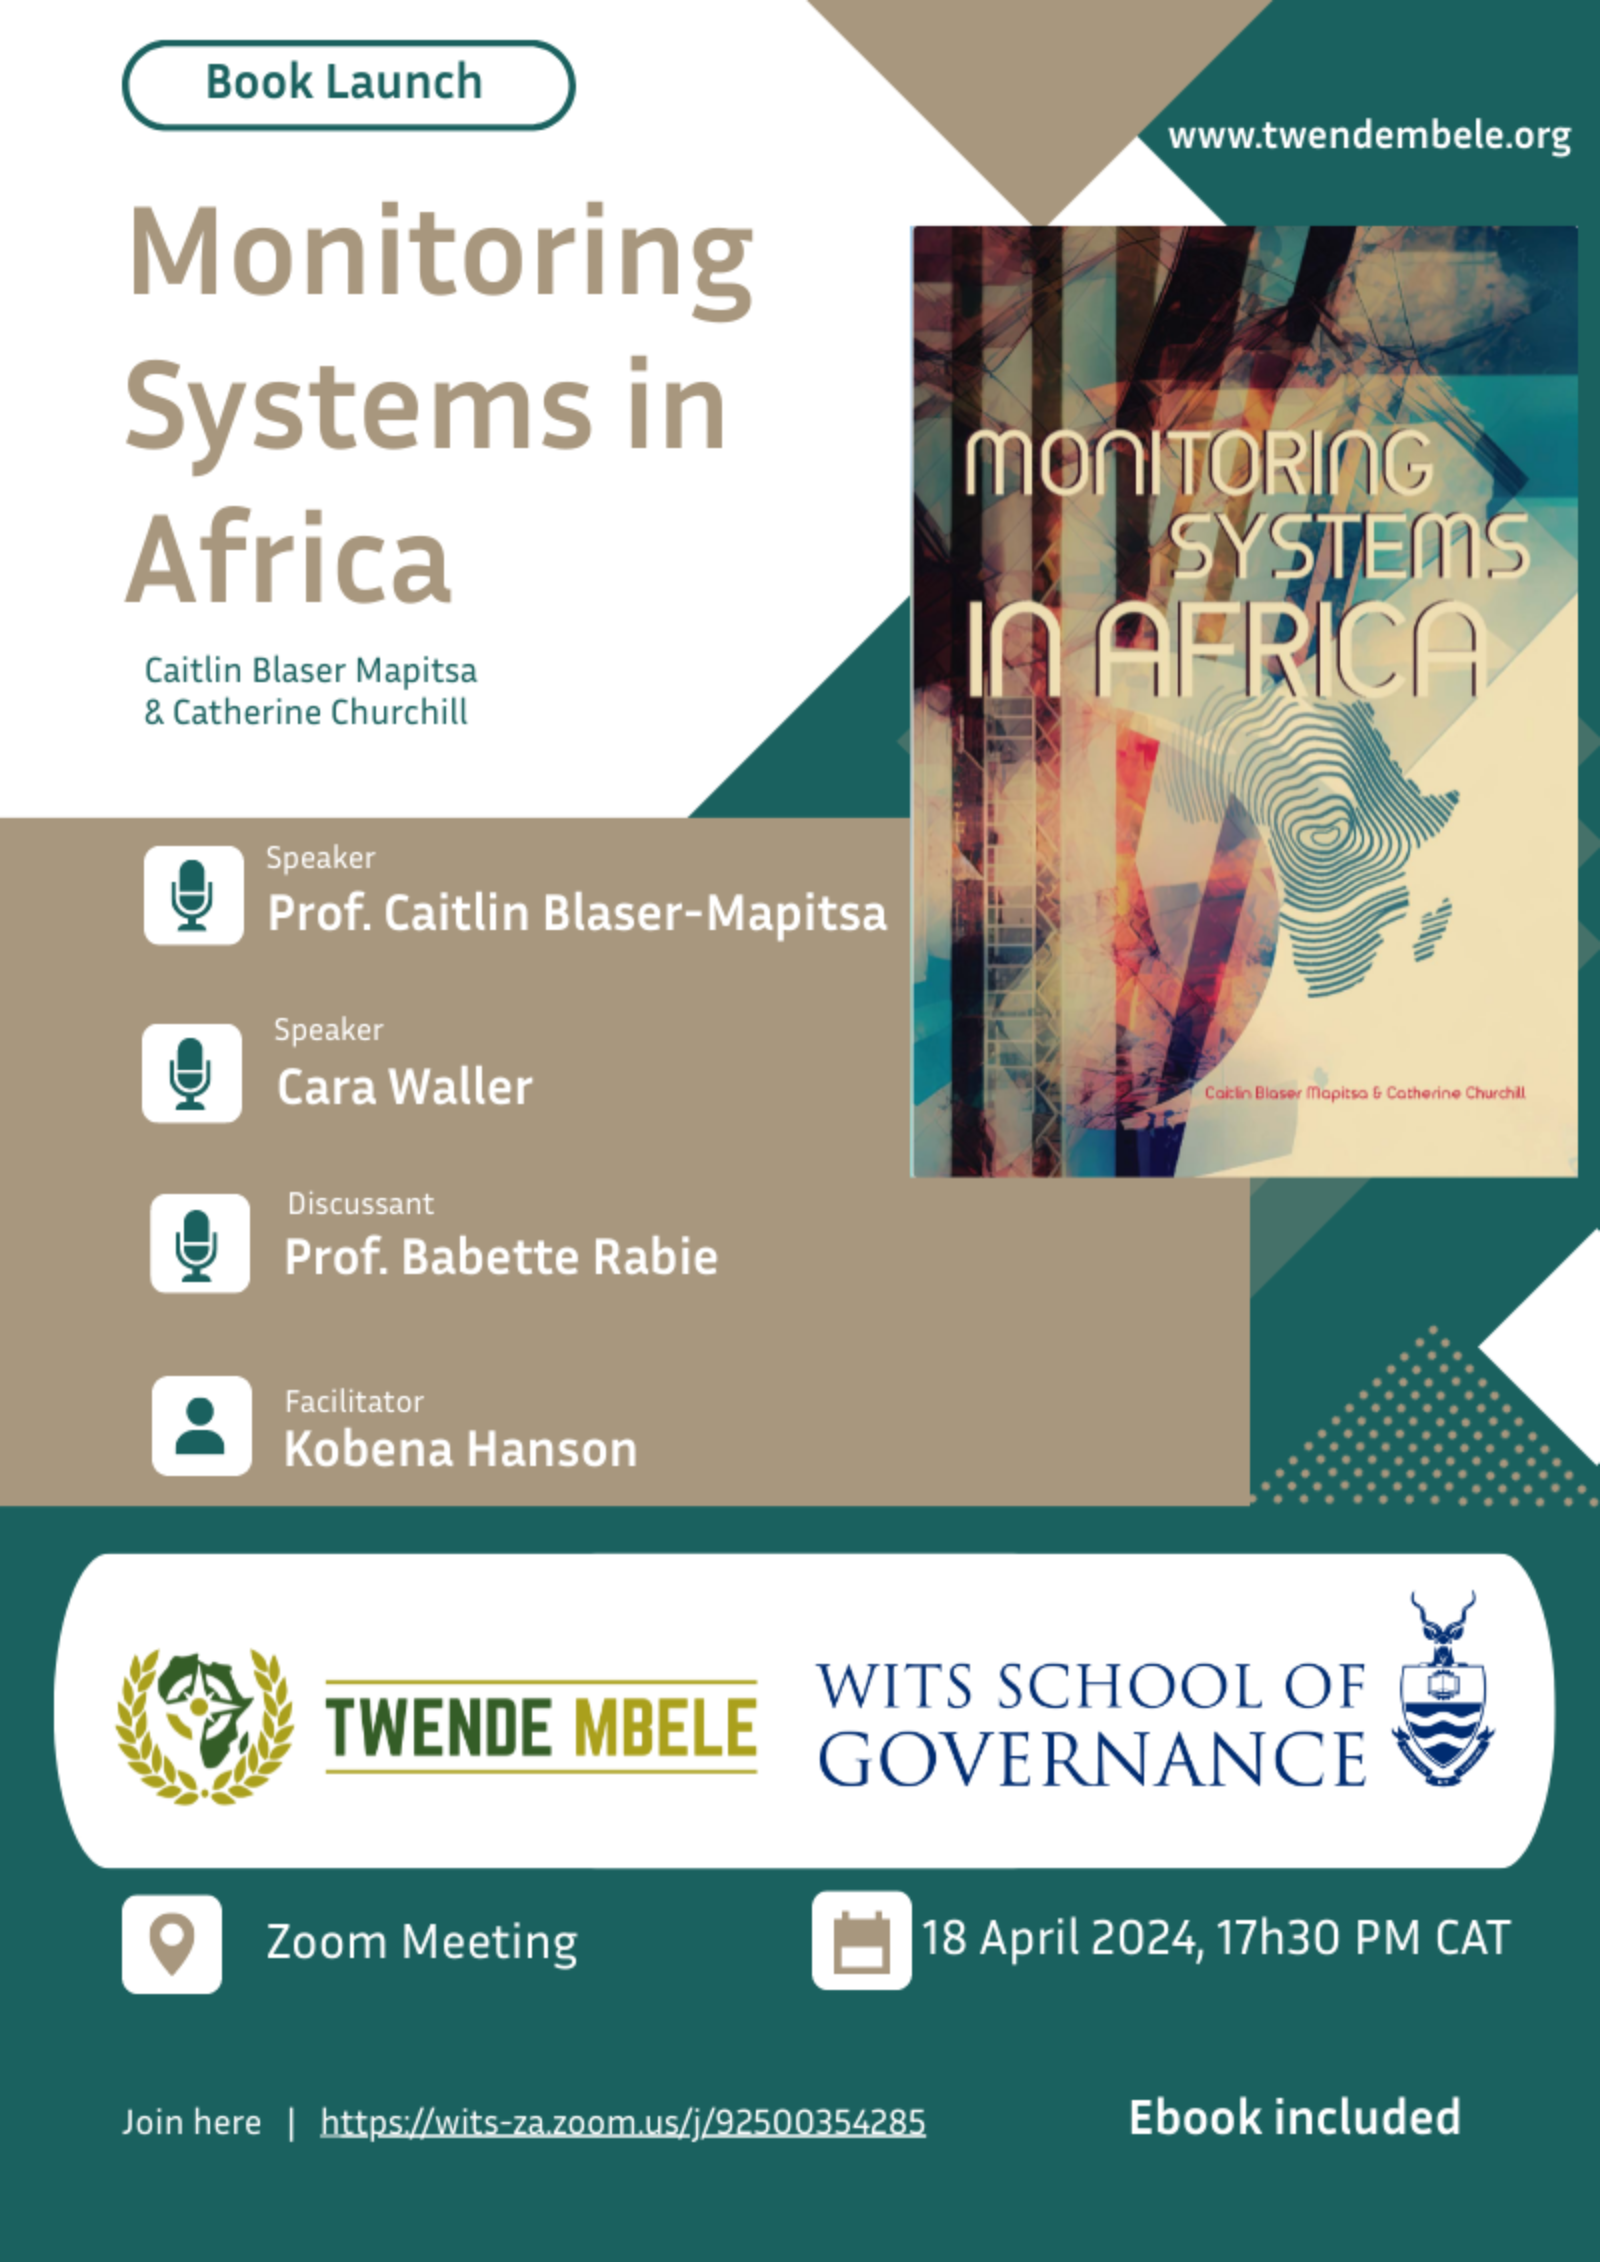 Monitoring Systems in Africa Book Launch